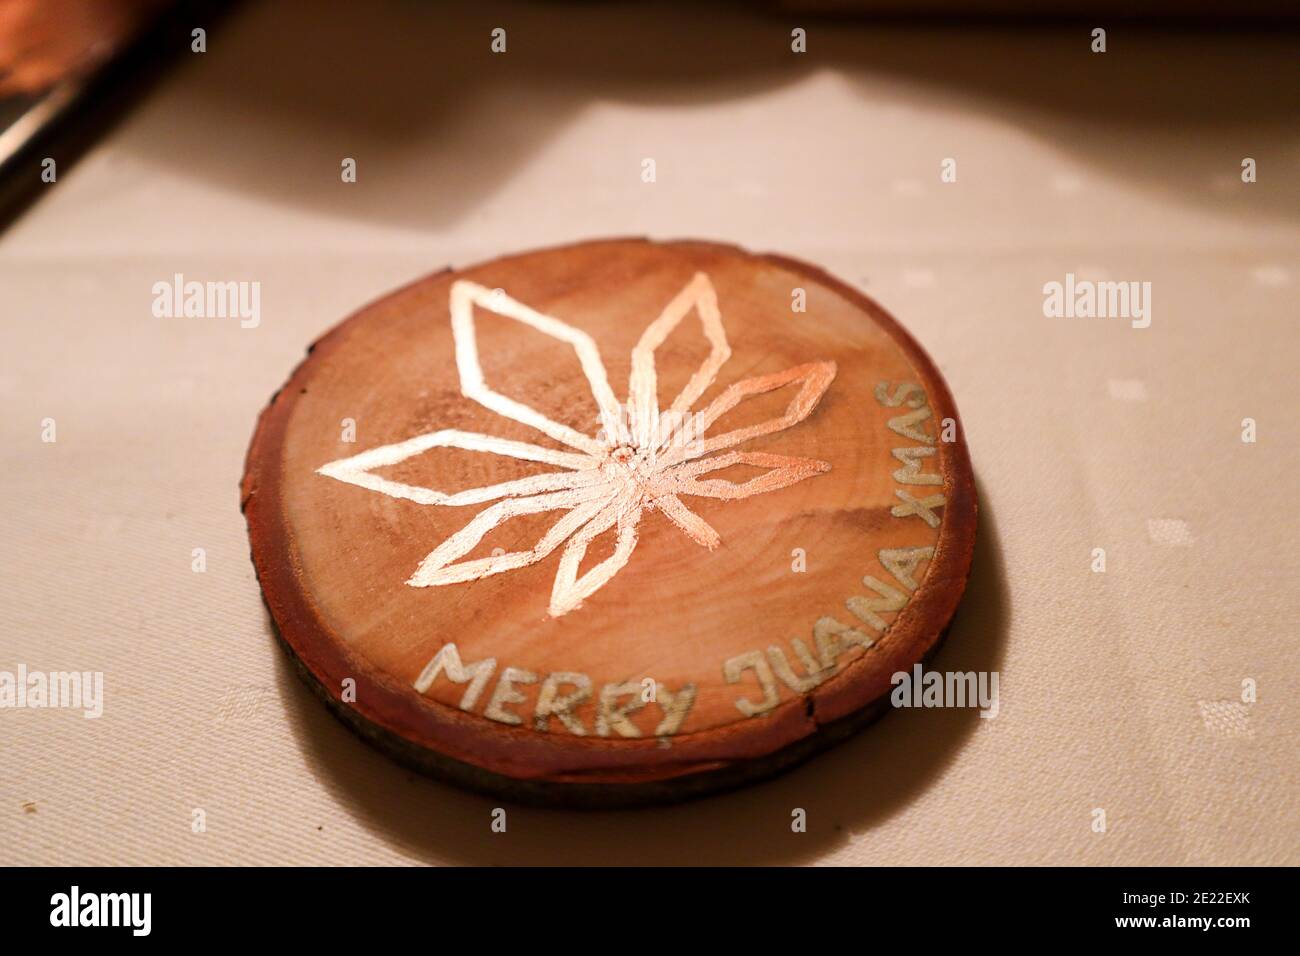 Selfmade wooden coaster on a table with a marijuana leaf in bright colors. The text MERRY JUANA XMAS decorates the coaster. Stock Photo